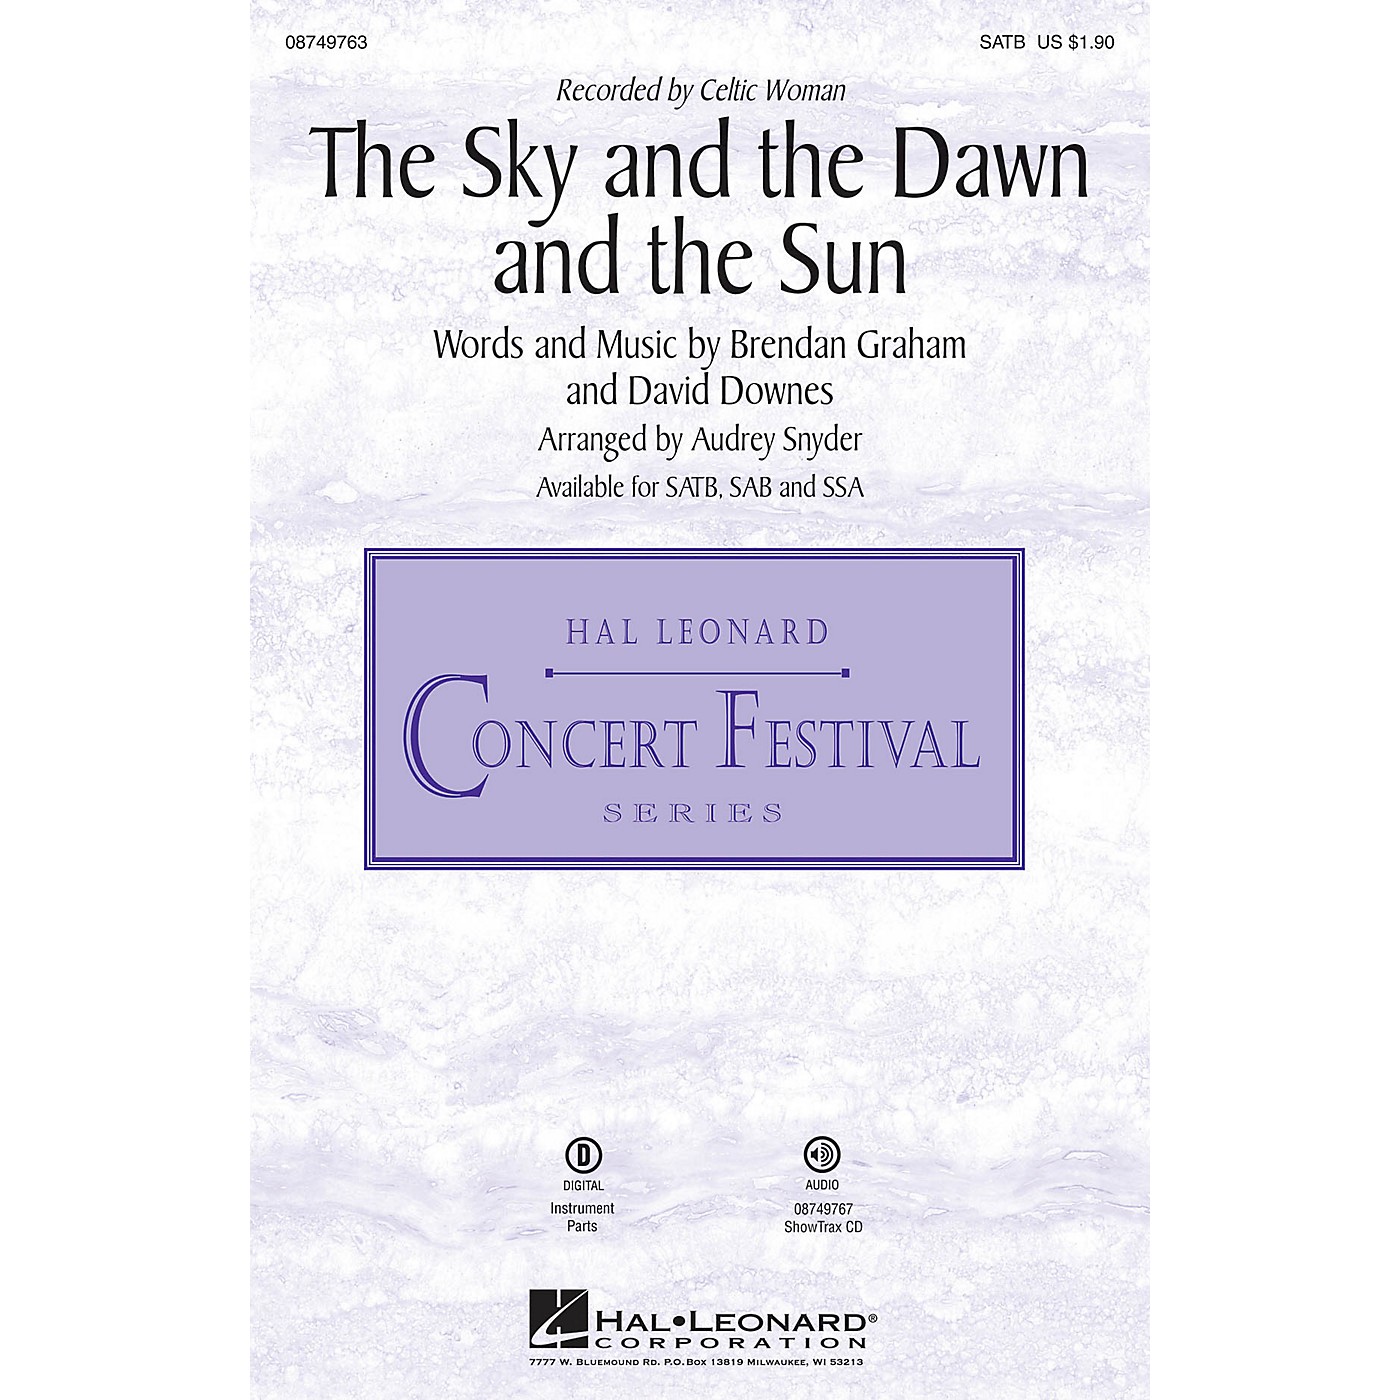 Hal Leonard The Sky and the Dawn and the Sun SSA by Celtic Woman Arranged by Audrey Snyder thumbnail